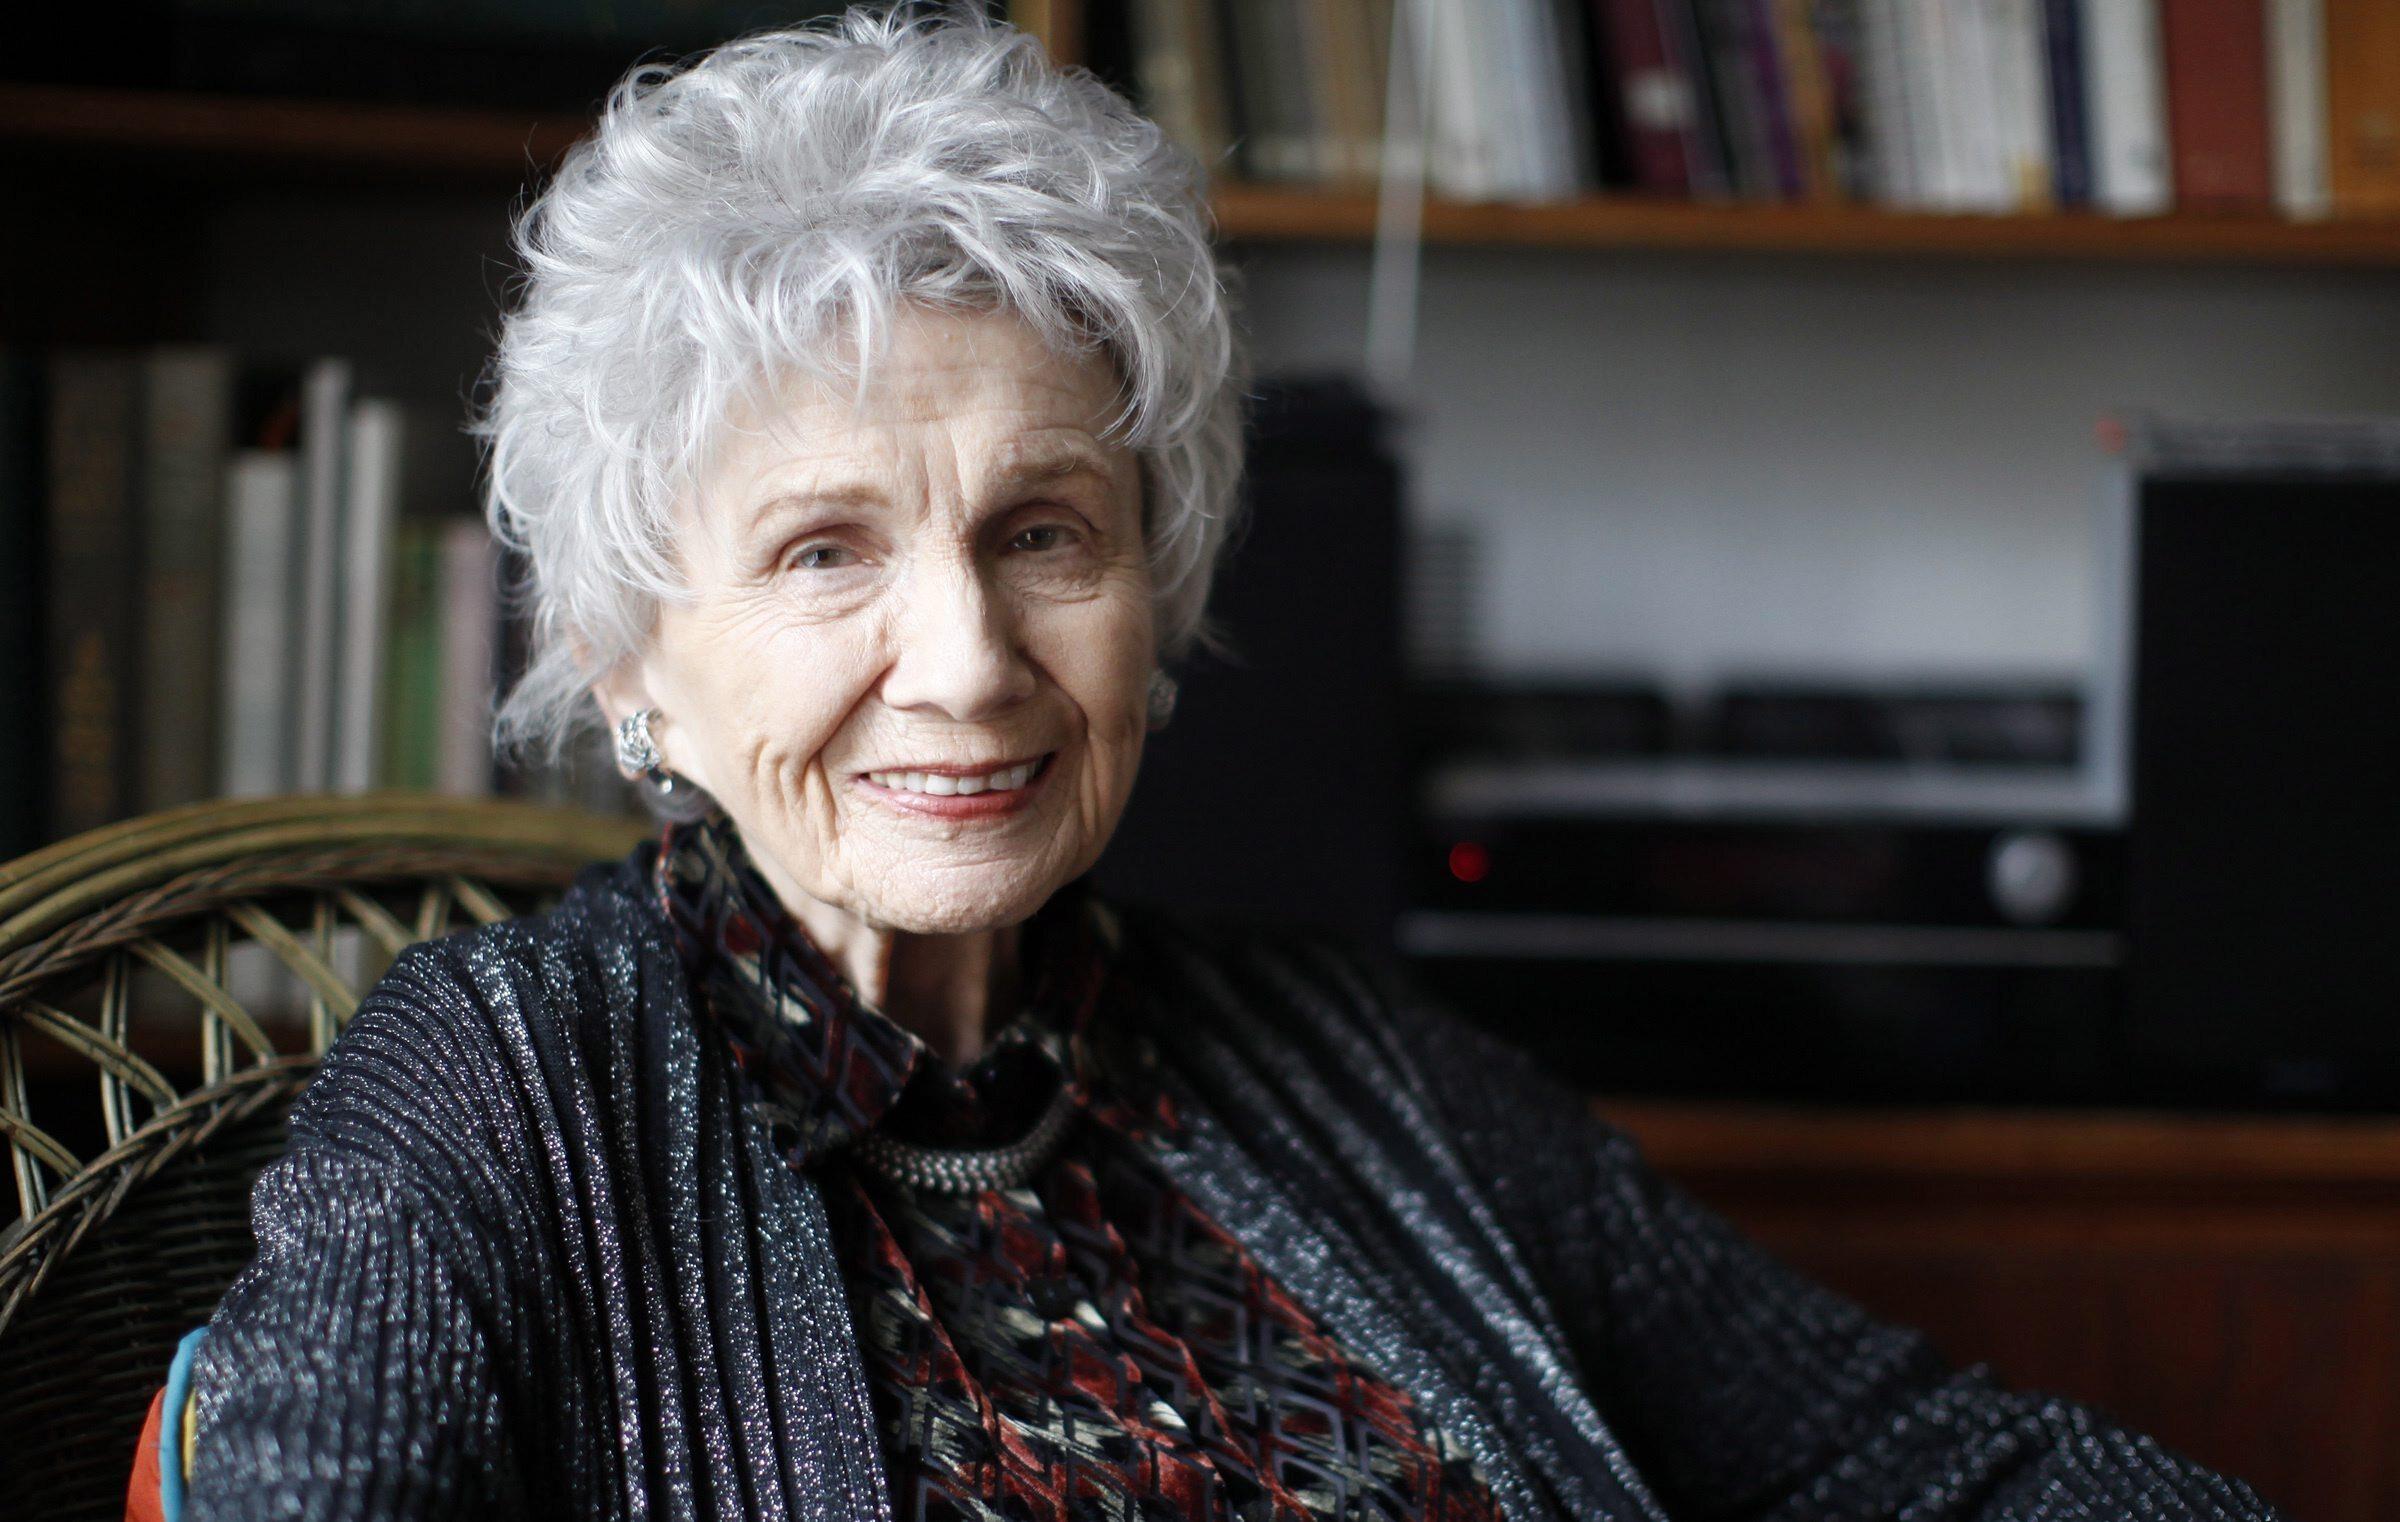 Canadian author Alice Munro is photographed during an interview in Victoria, British Columbia, in December 2013. Photo: Canadian Press via AP